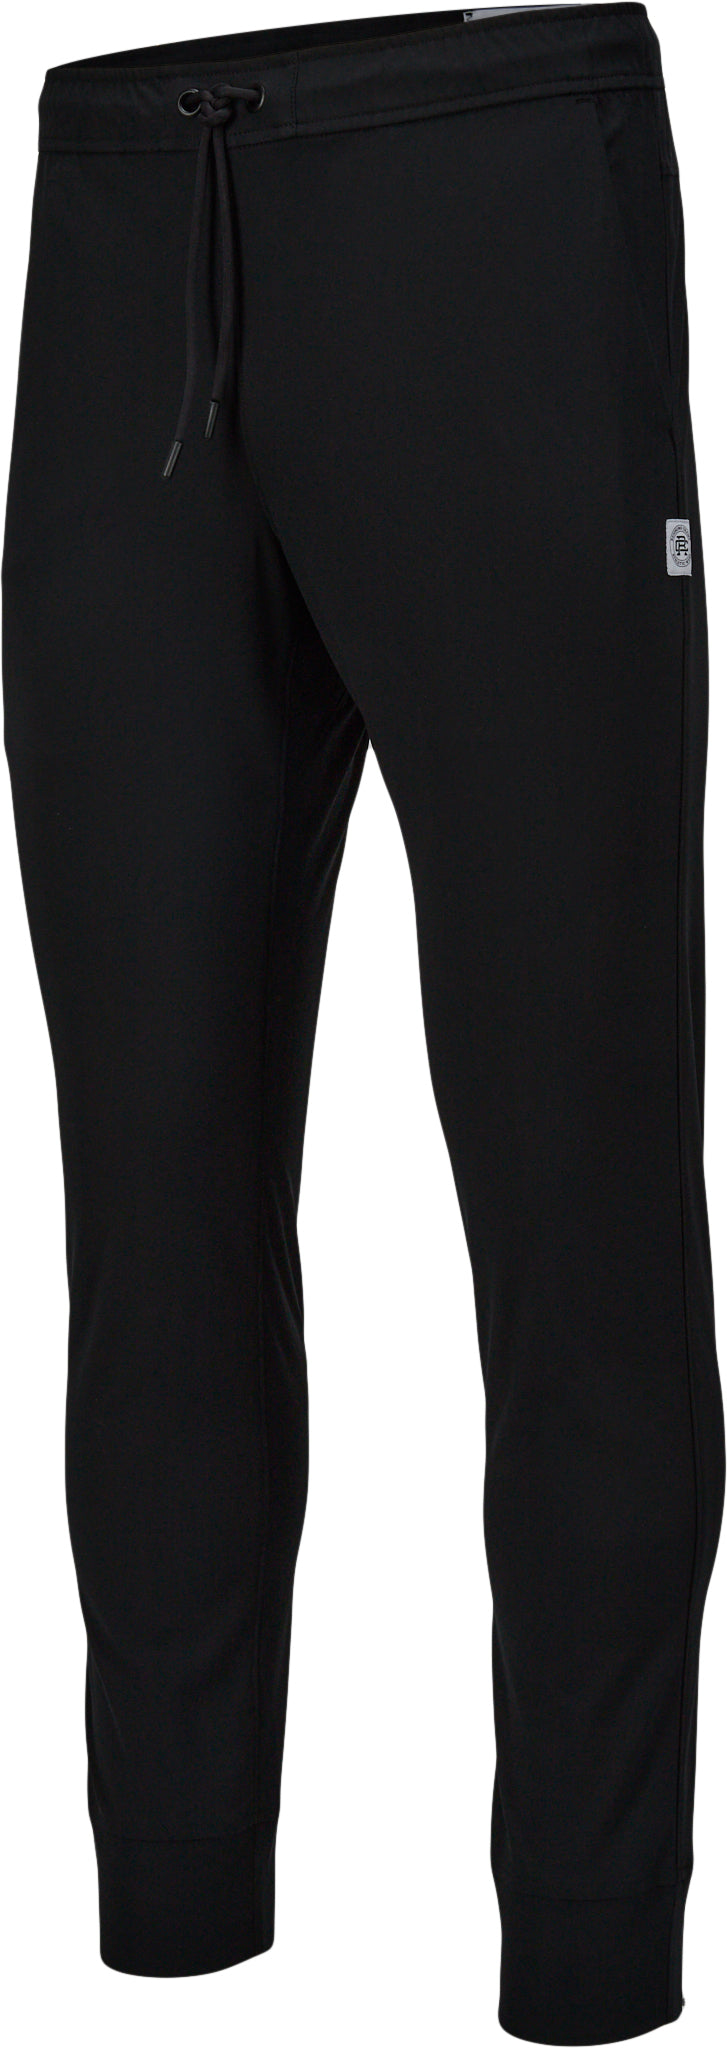 Lole Women's Size Small Lounge Jogger Pants, 2-Pack, Black /Charcoal New